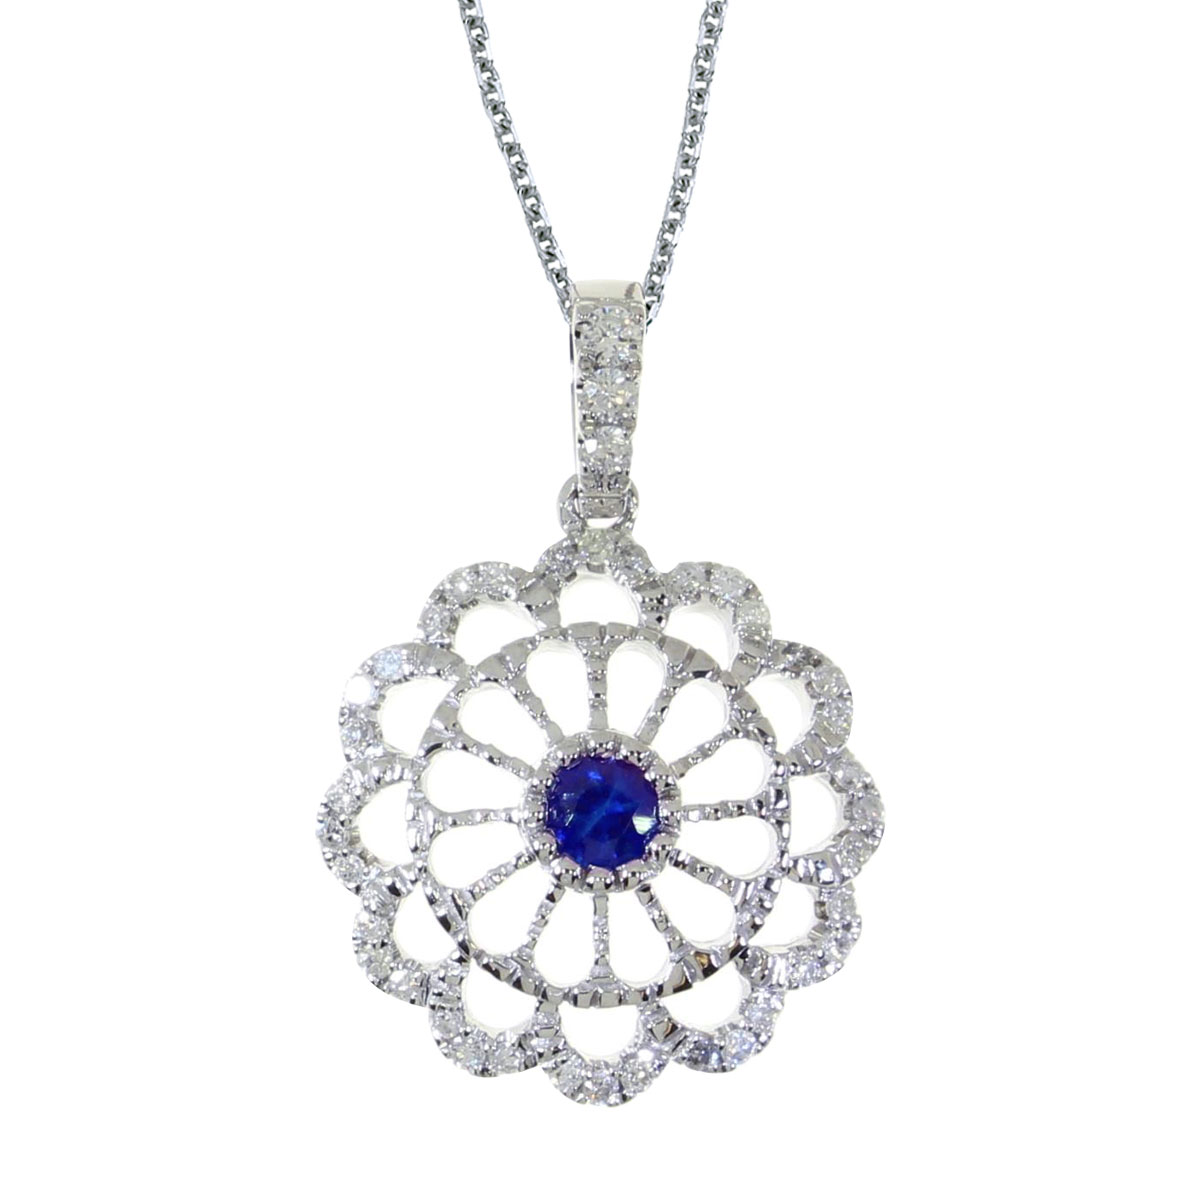 This beautiful 14k white gold pendant features a bright 3.5 mm round sapphire and .05 carats of s...